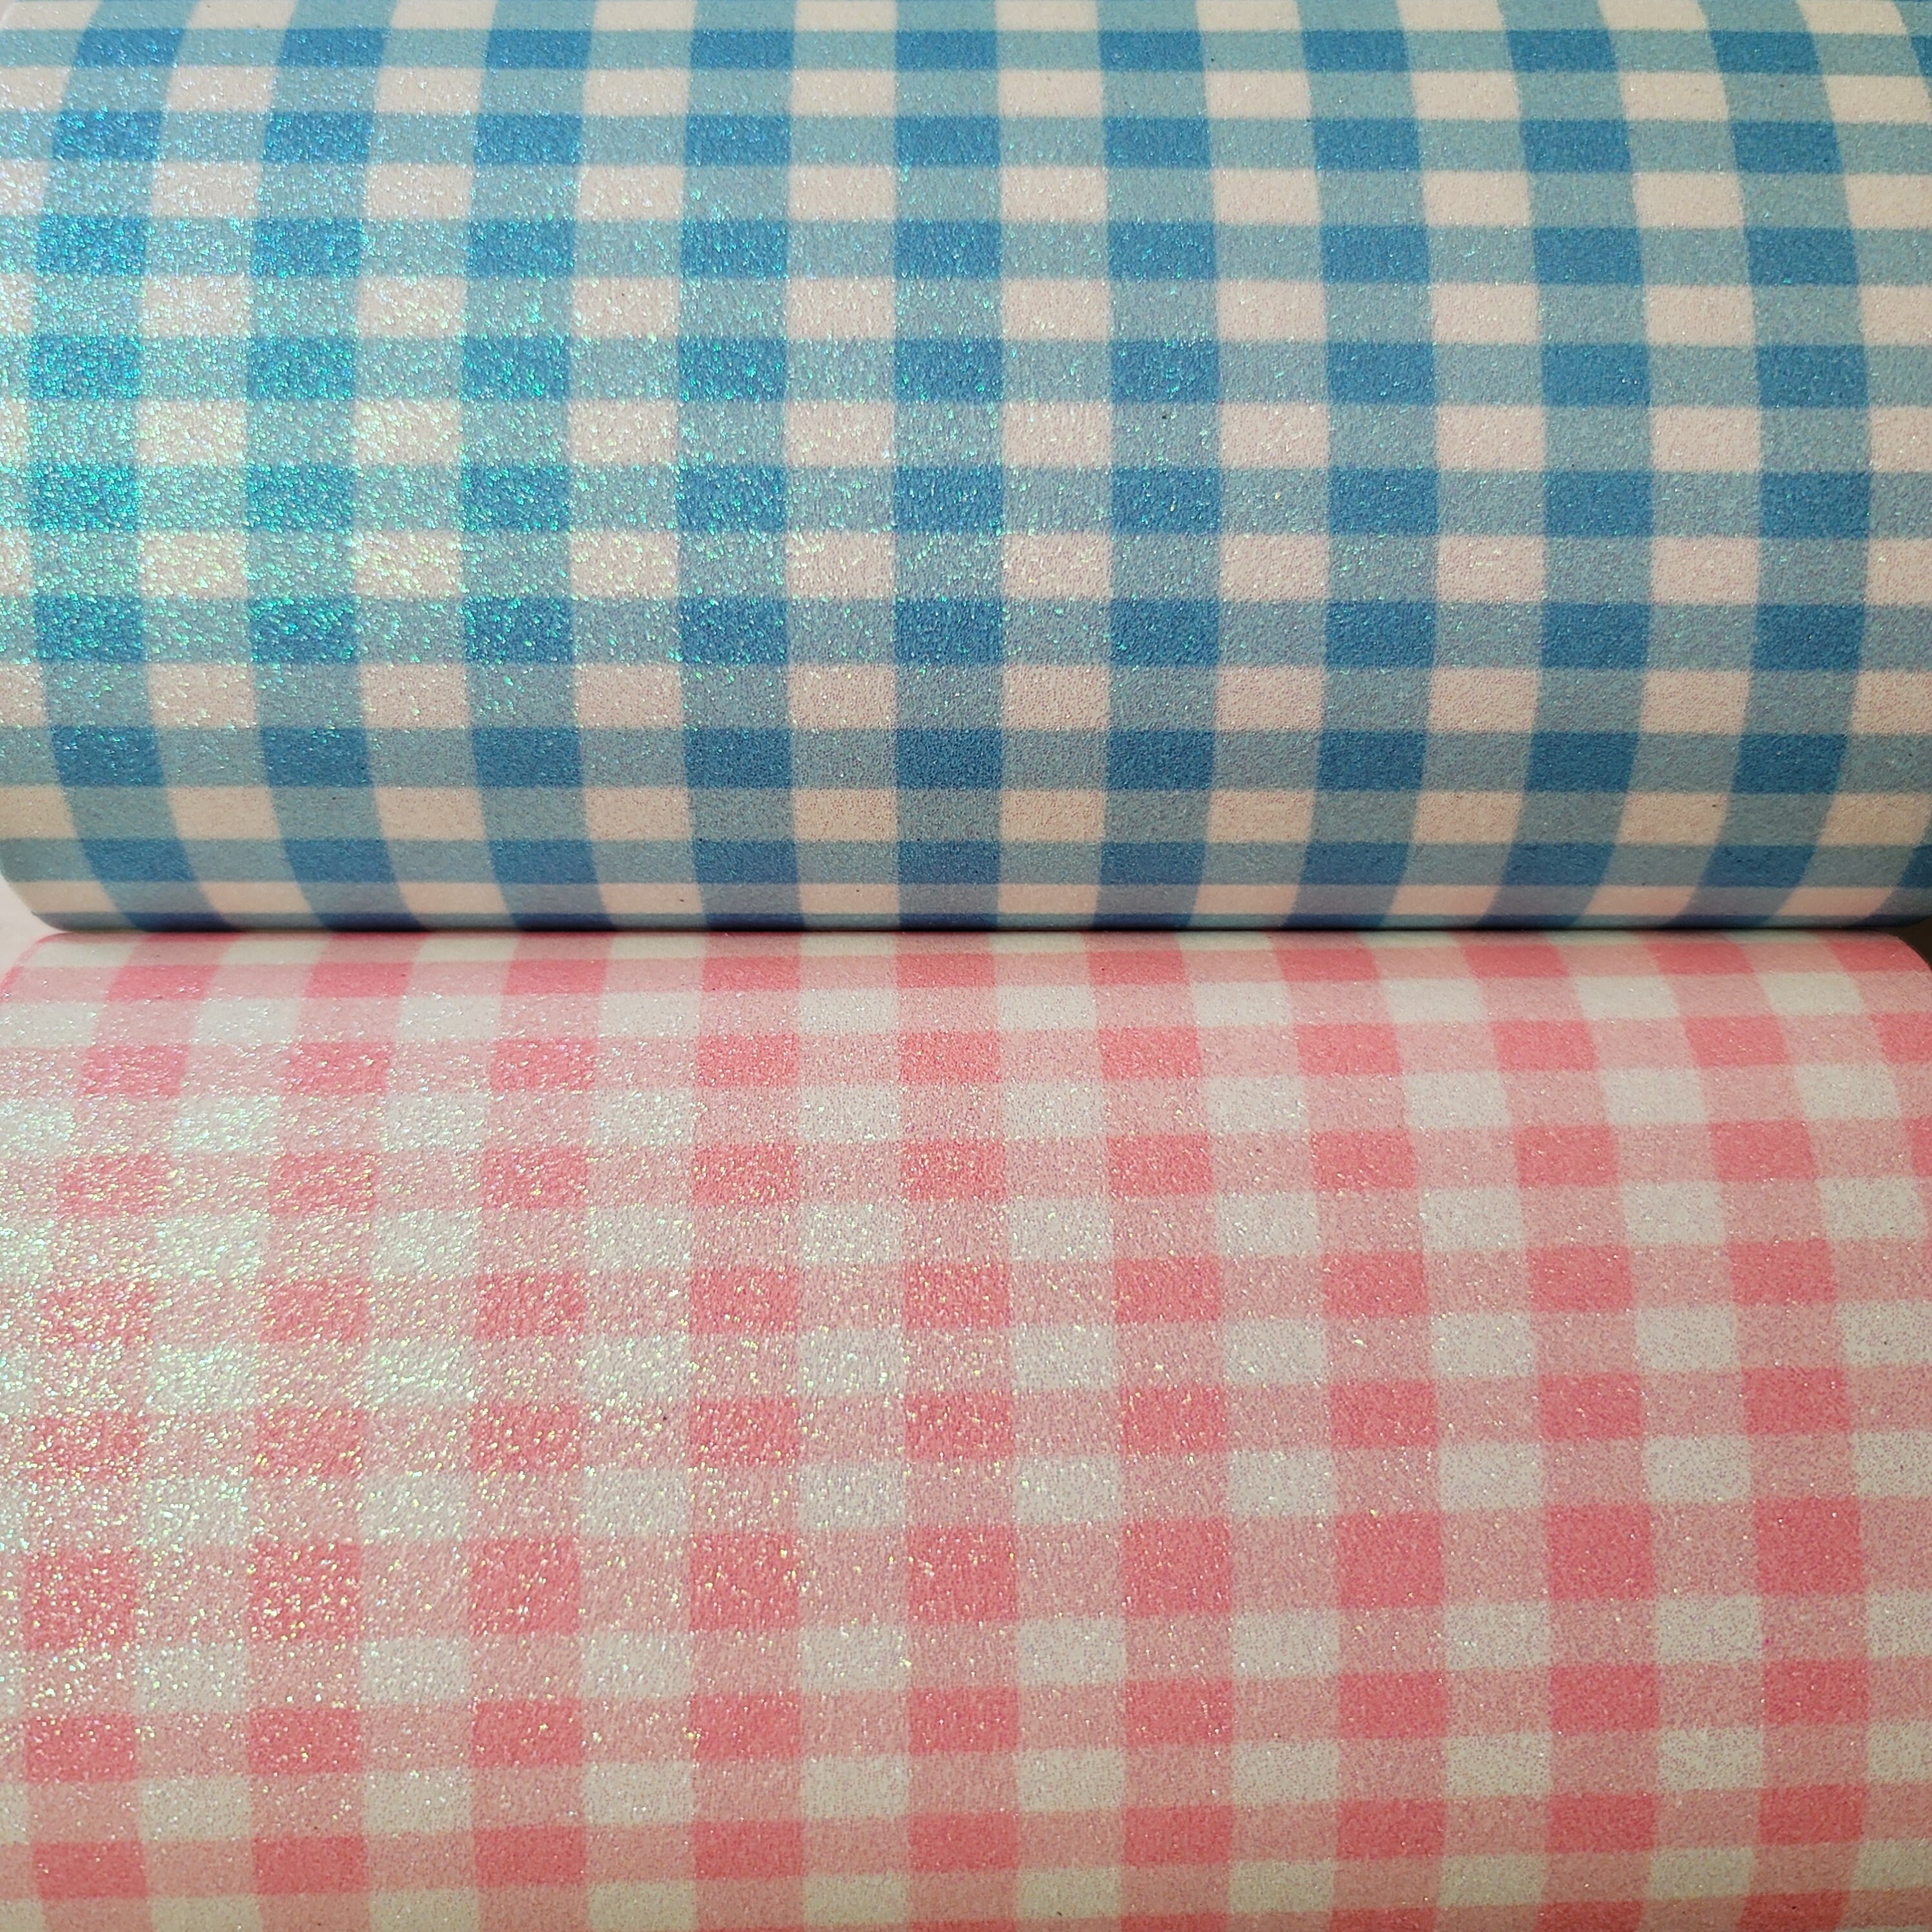 Pink Gingham Fabric -  Canada